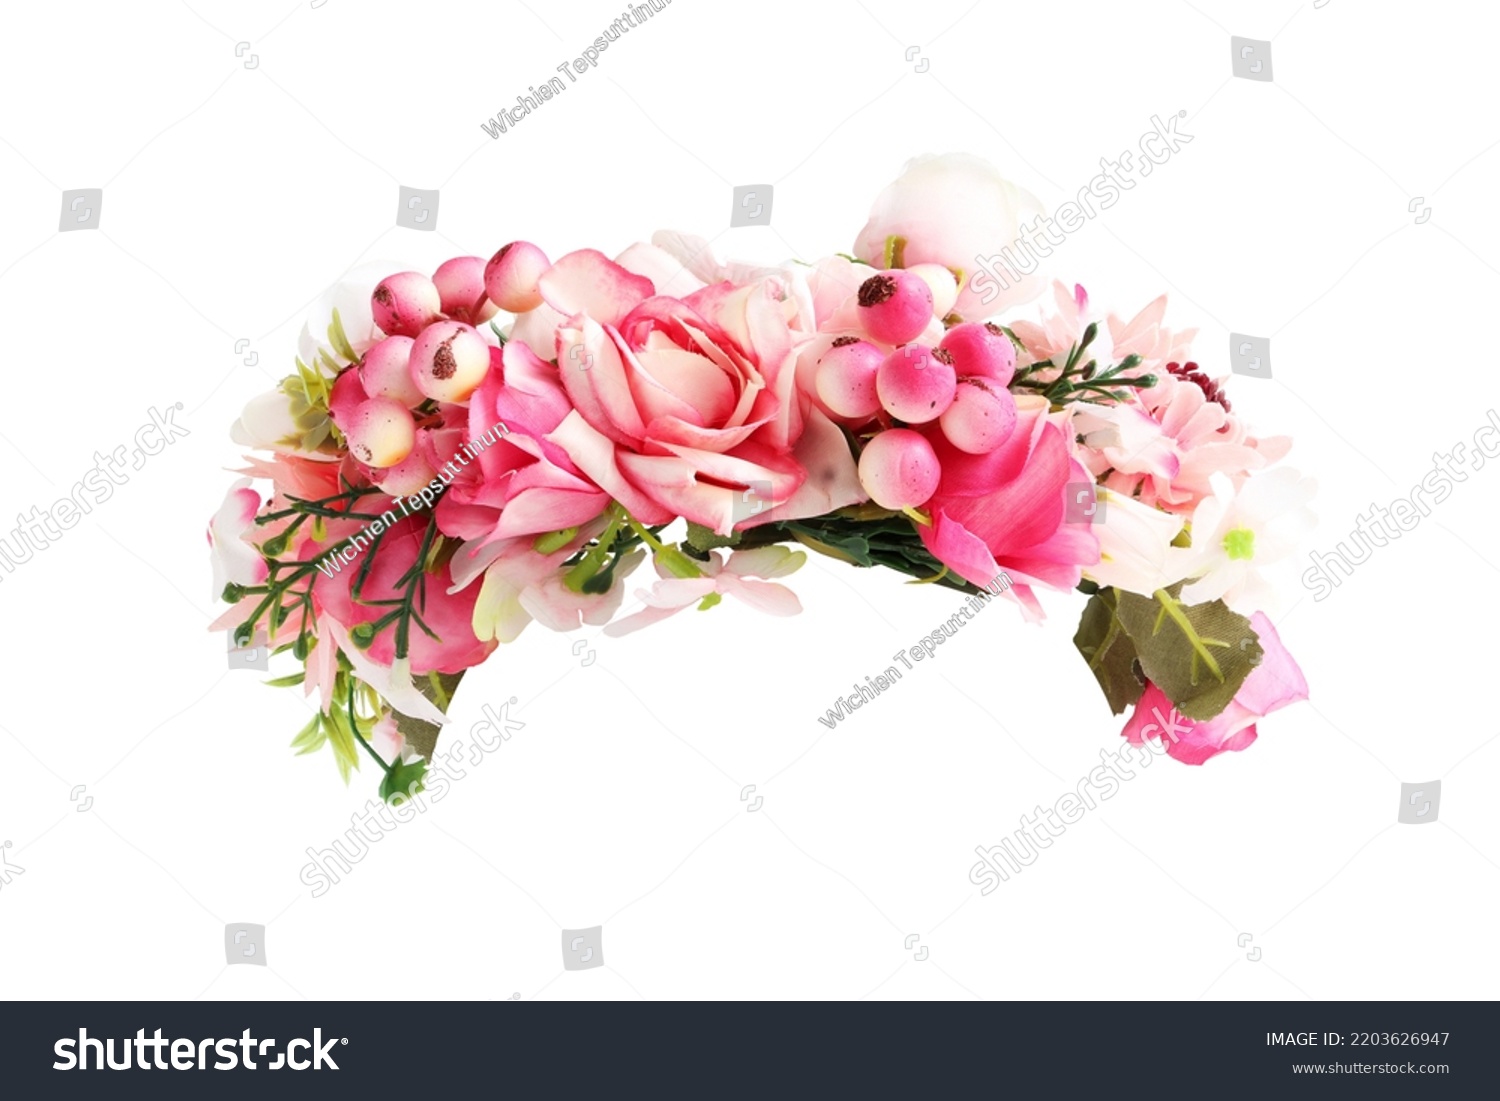 Pink Flower Crown Front View isolated on white background with clipping paths #2203626947